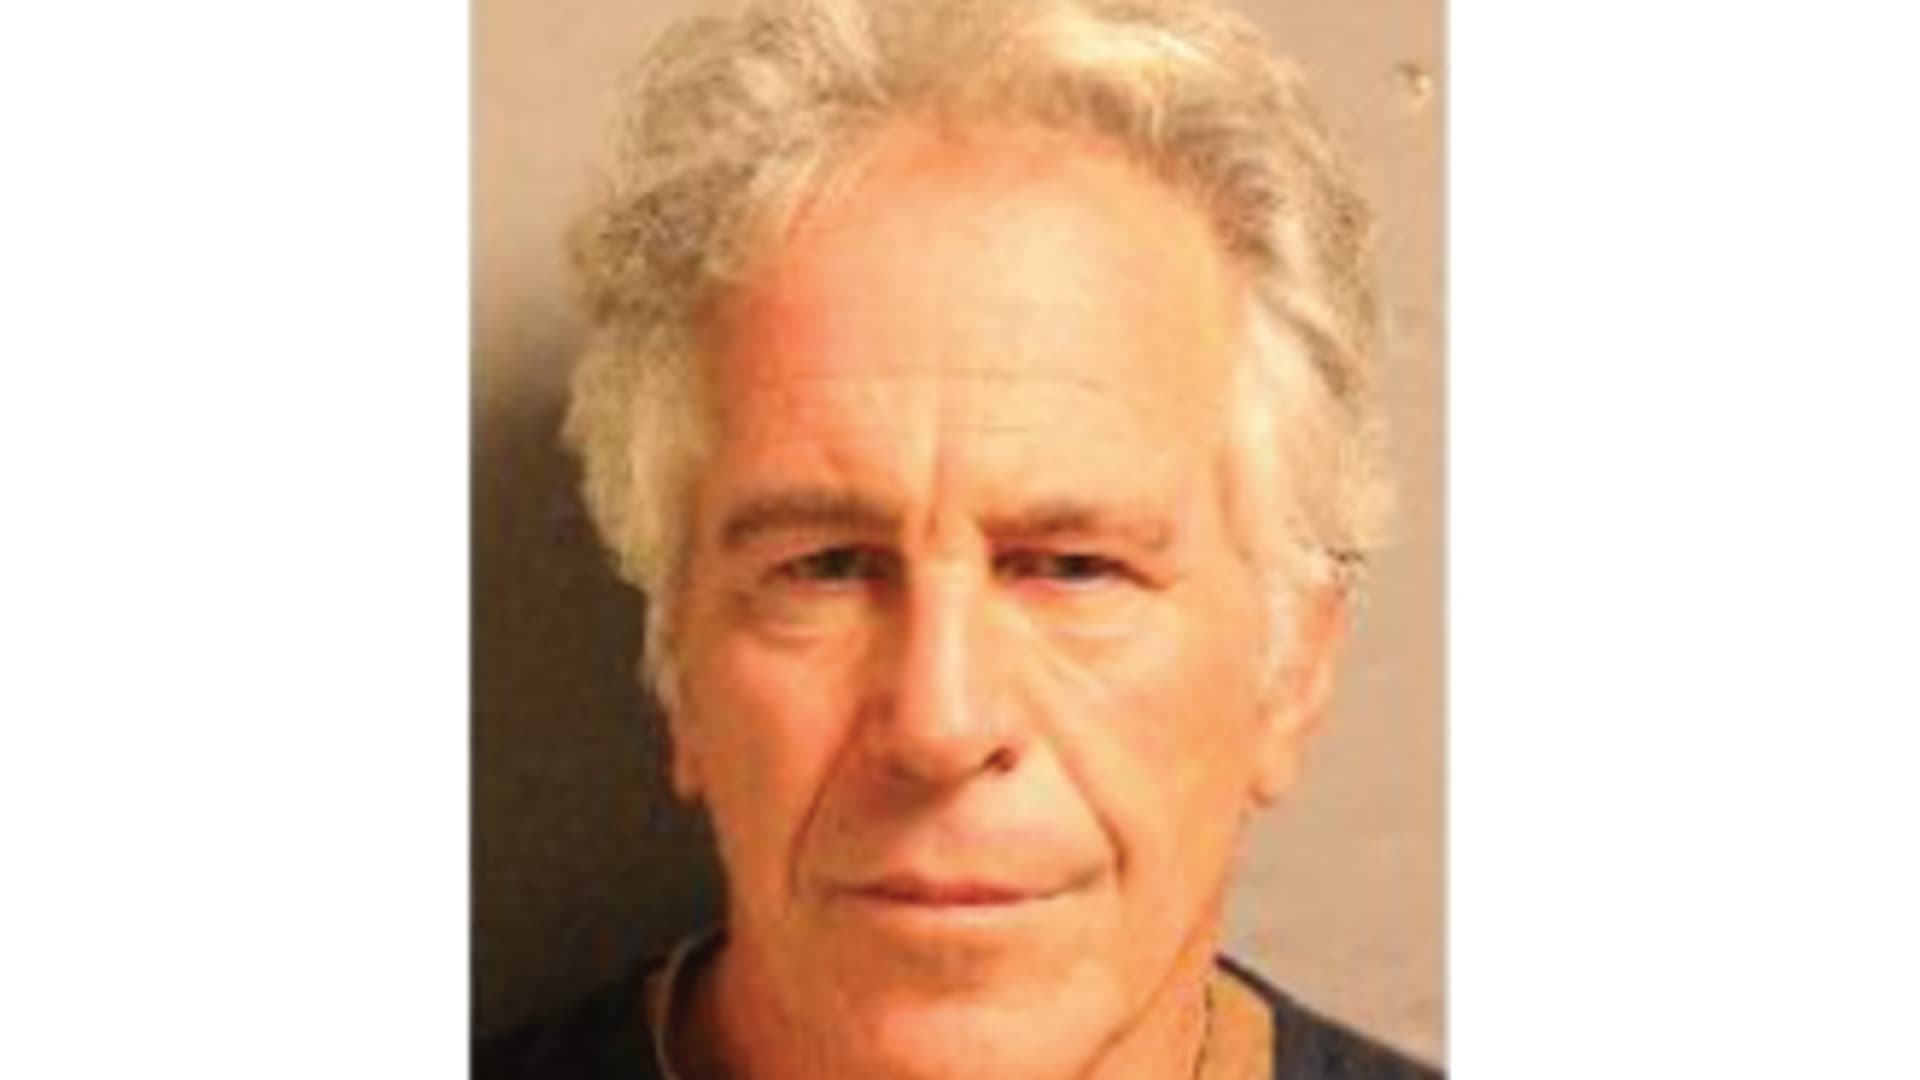 JPMorgan Breeze will also be sued by Virgin Islands over Jeffrey Epstein intercourse-trafficking claims